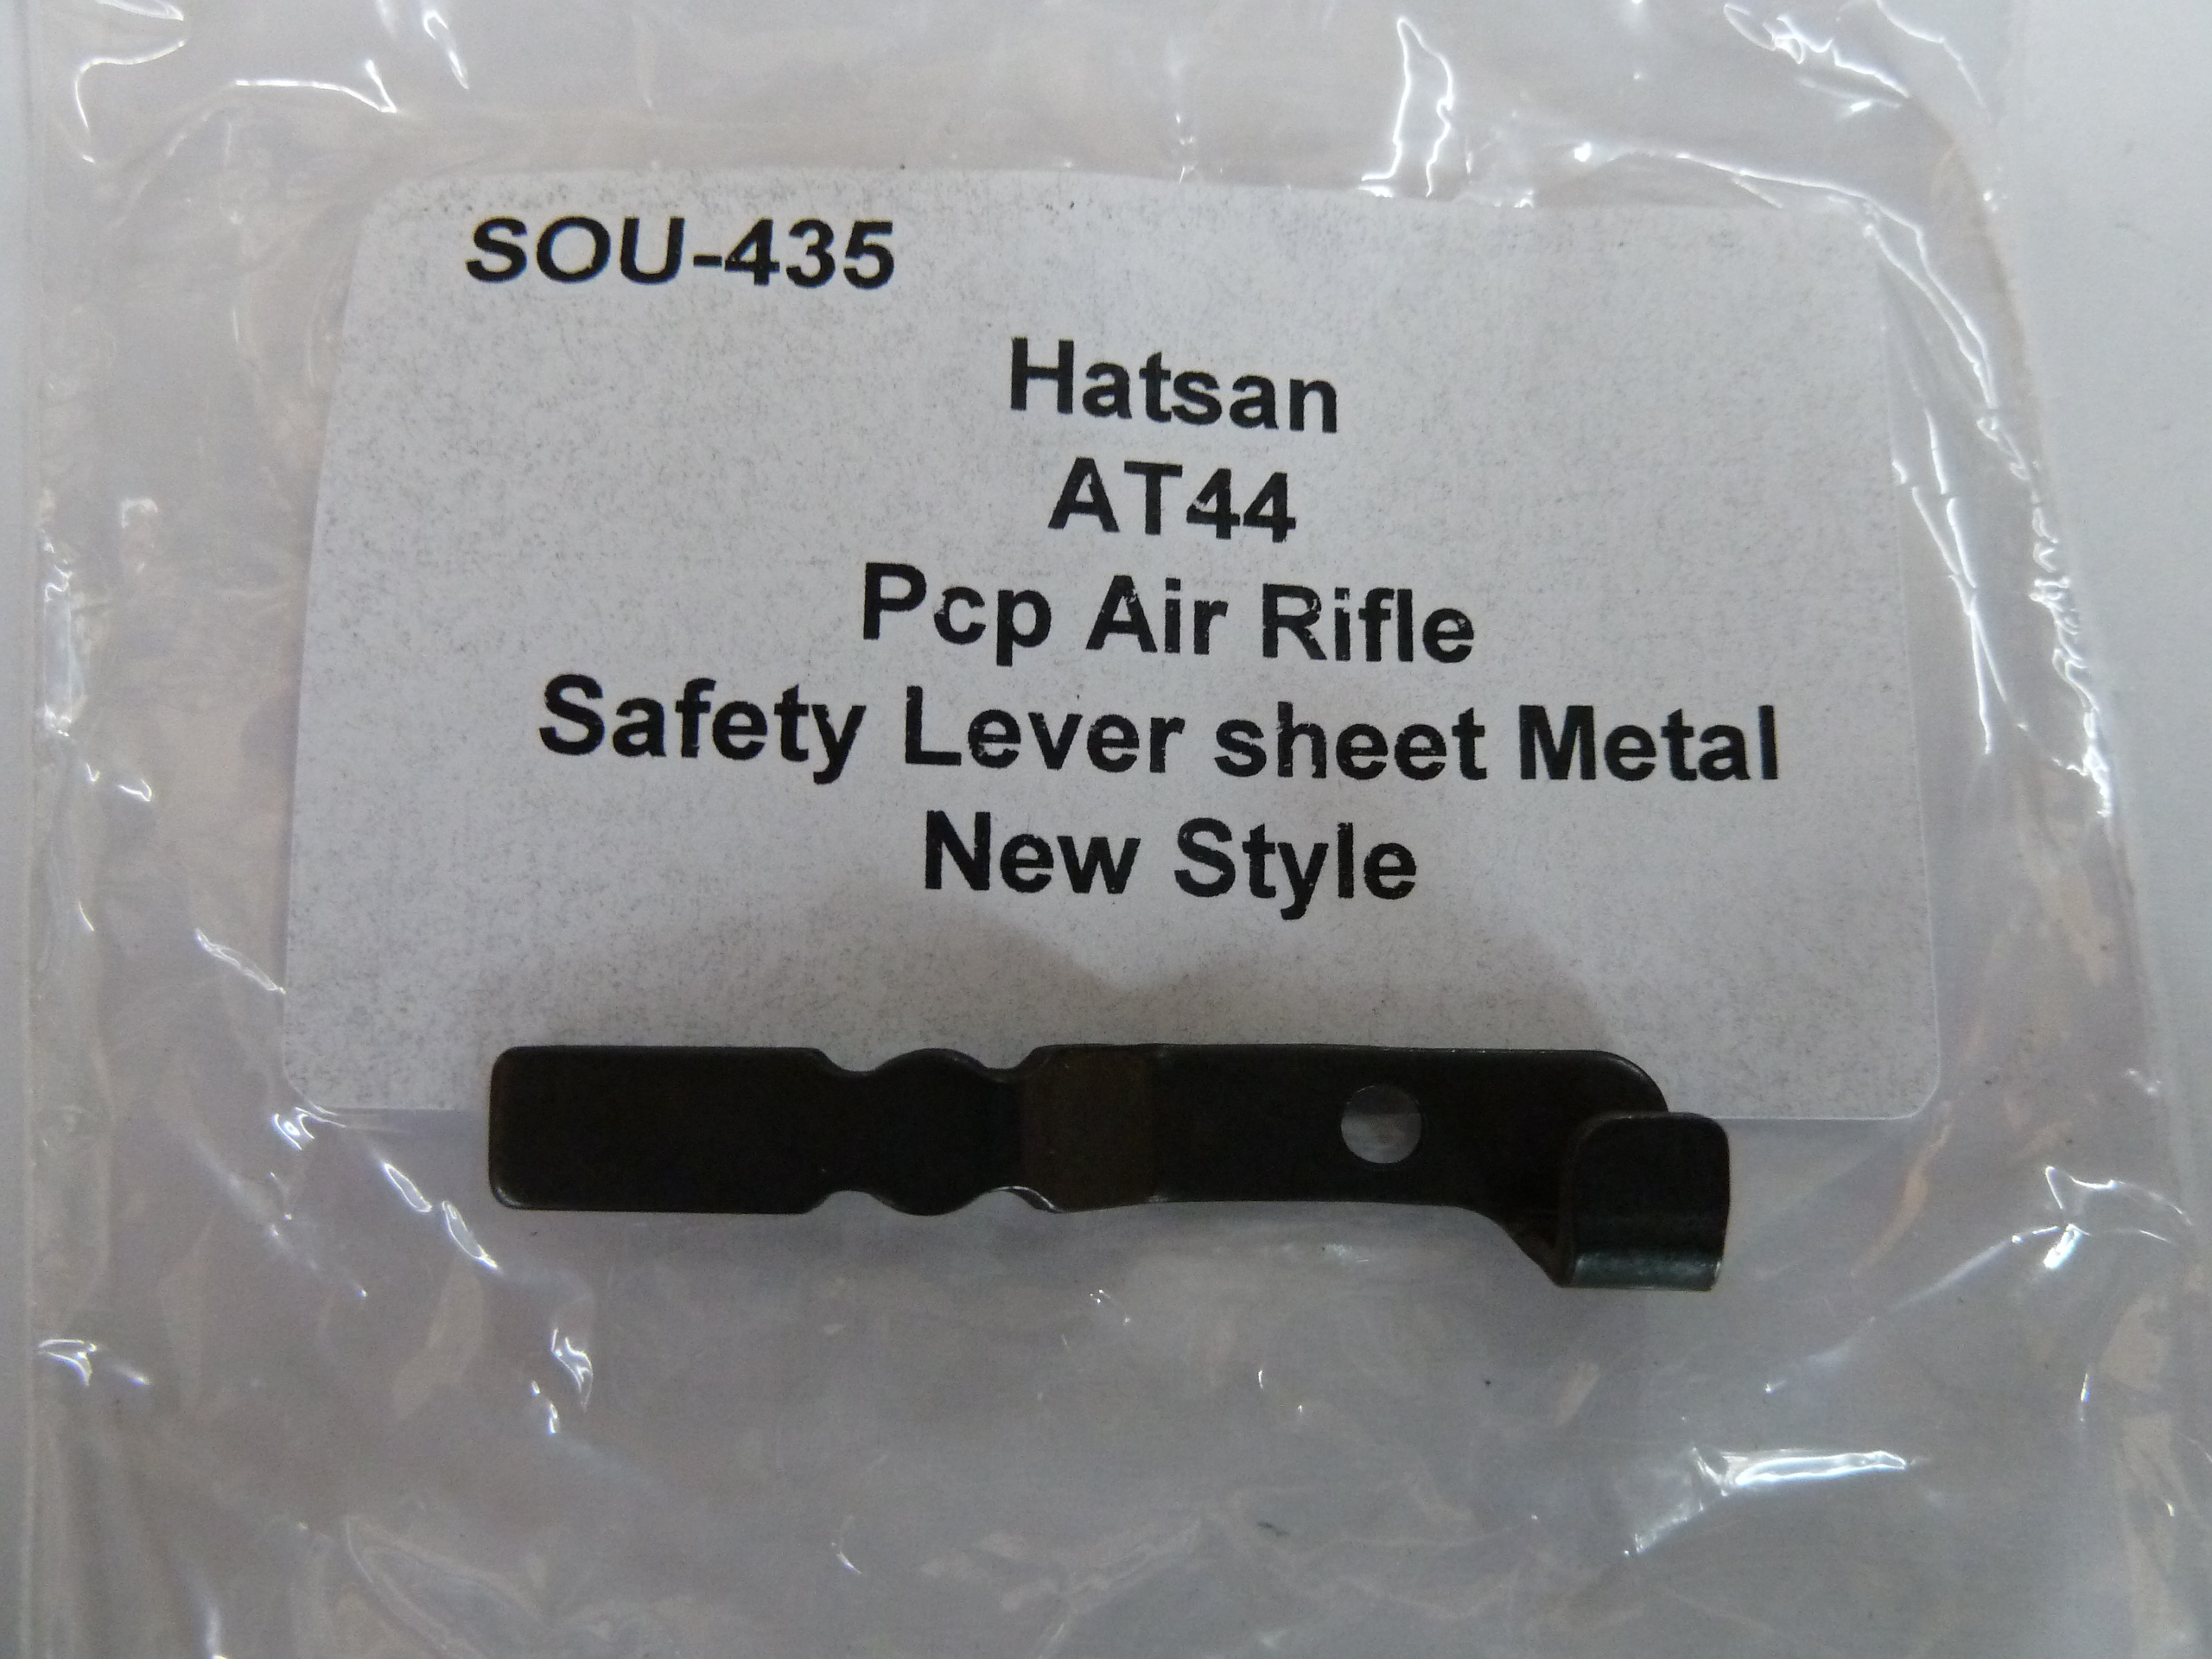 Hatsan AT44 safety lever